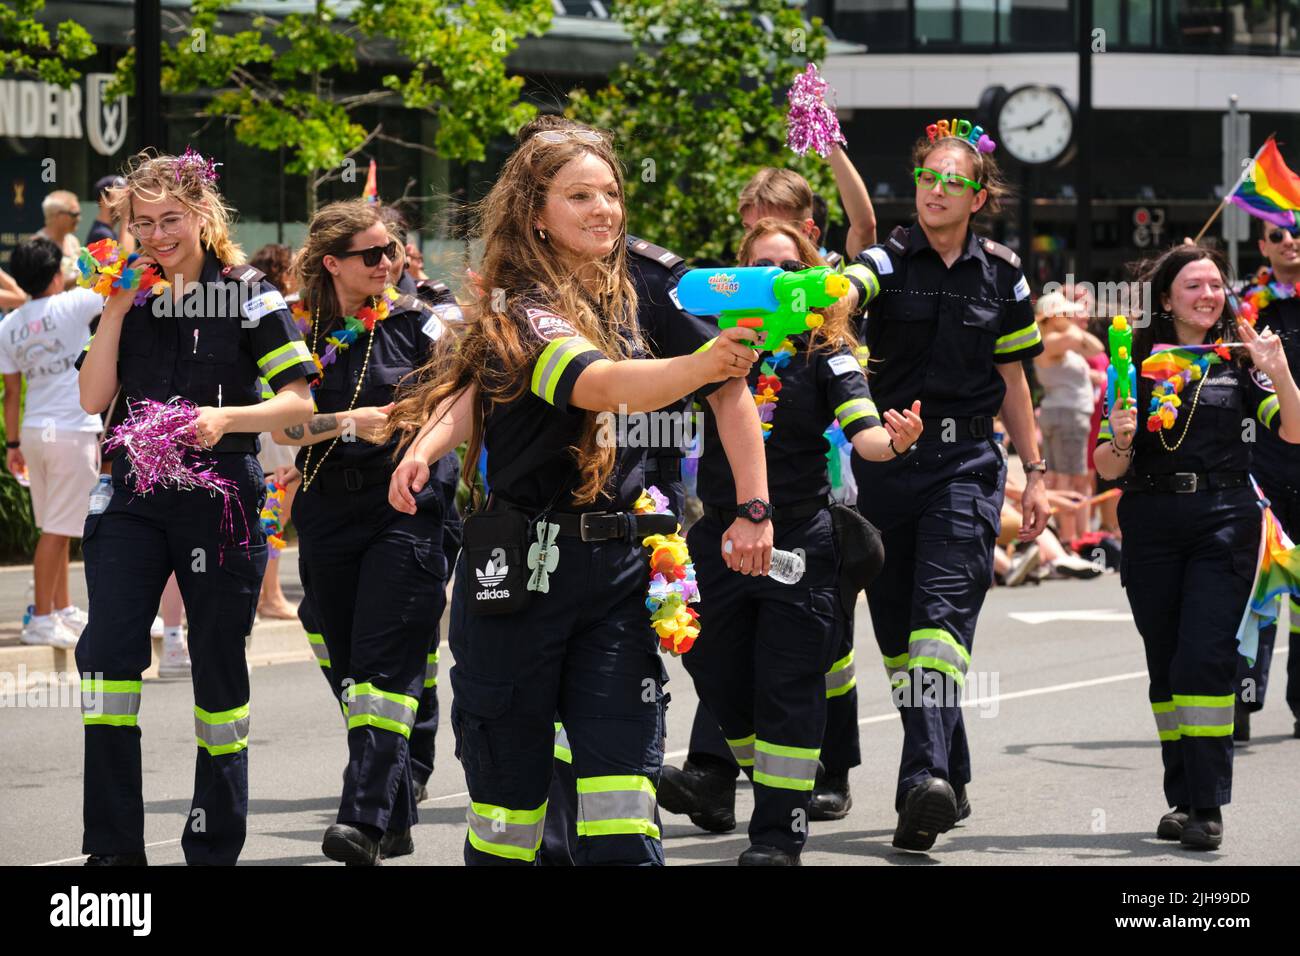 Halifax, Canada. July 16th, 2022. EMS float in the 2022 Halifax Pride Parade watering spectator on a hot sunny day. The Parade returns through the street of the city after two years absence. Credit: meanderingemu/Alamy Live News Stock Photo